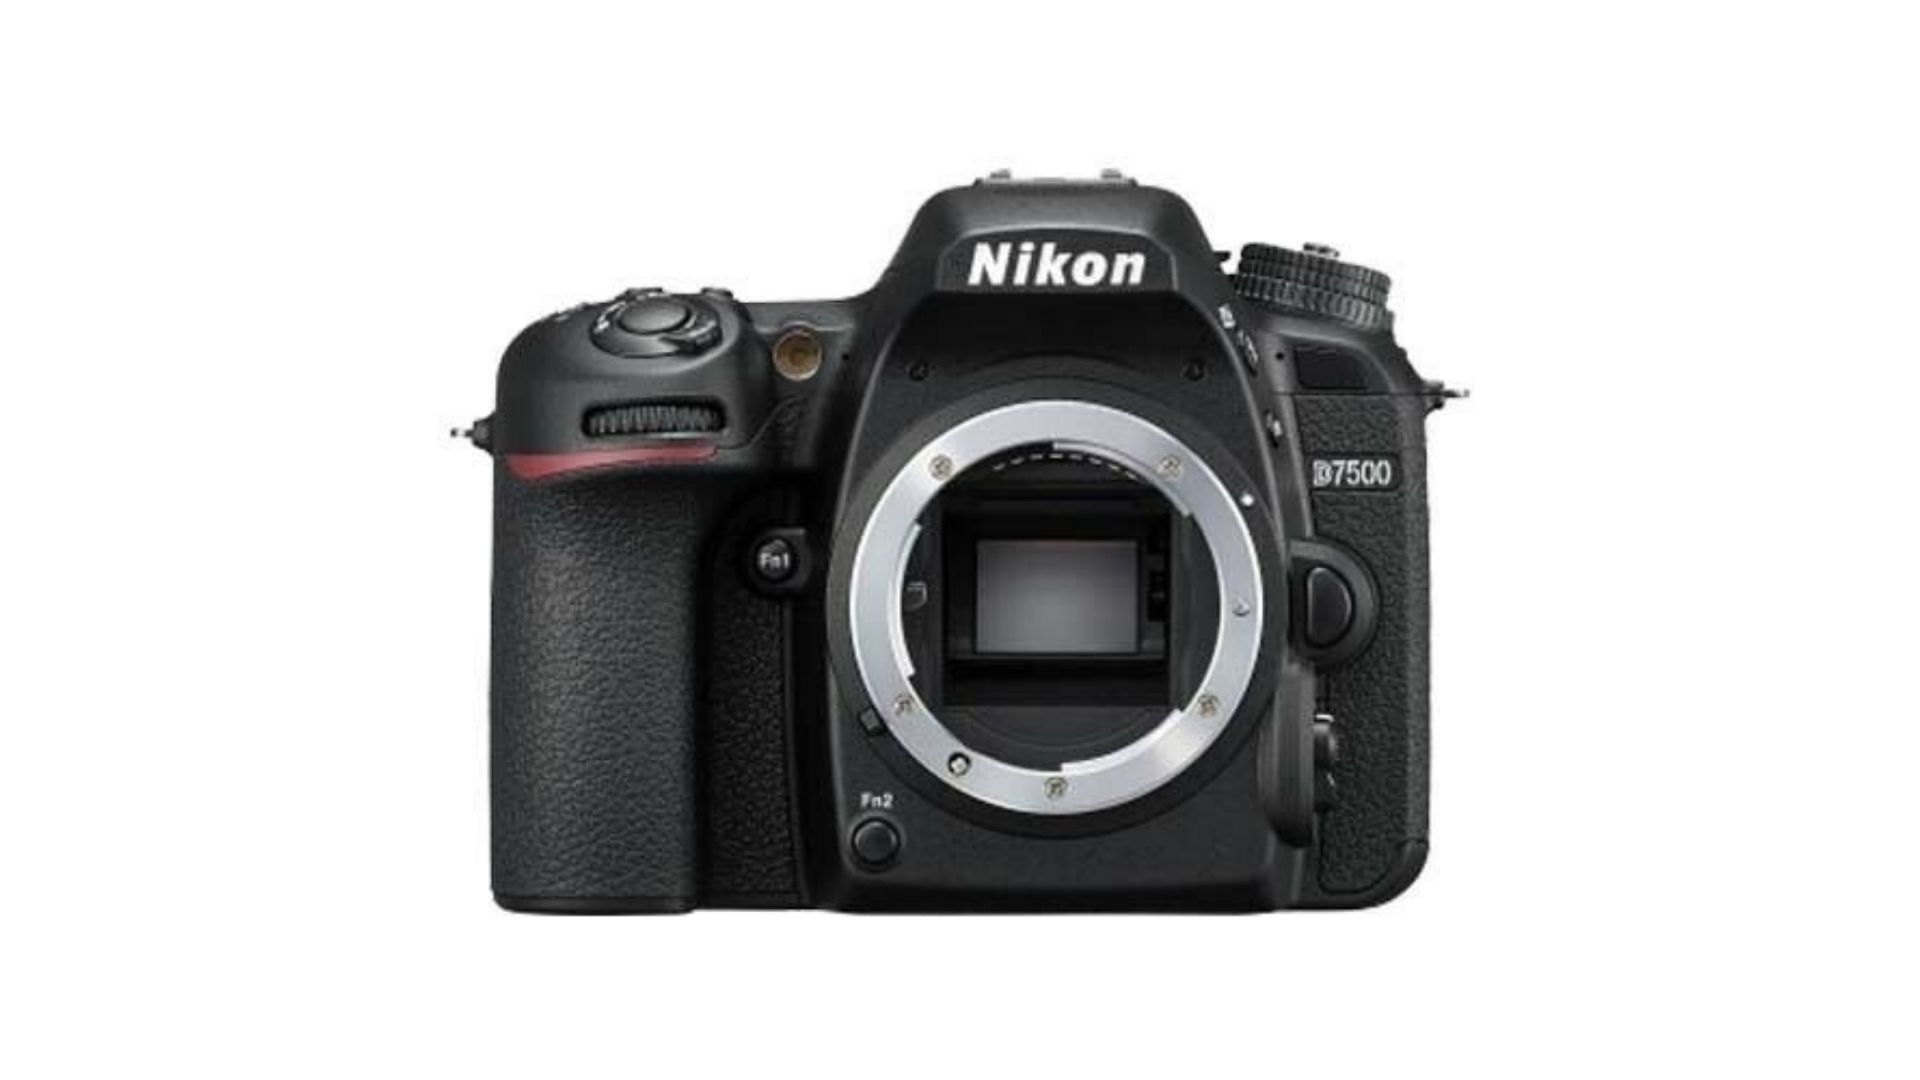 Nikon cameras are another eBay certified refurbished to take advantage of